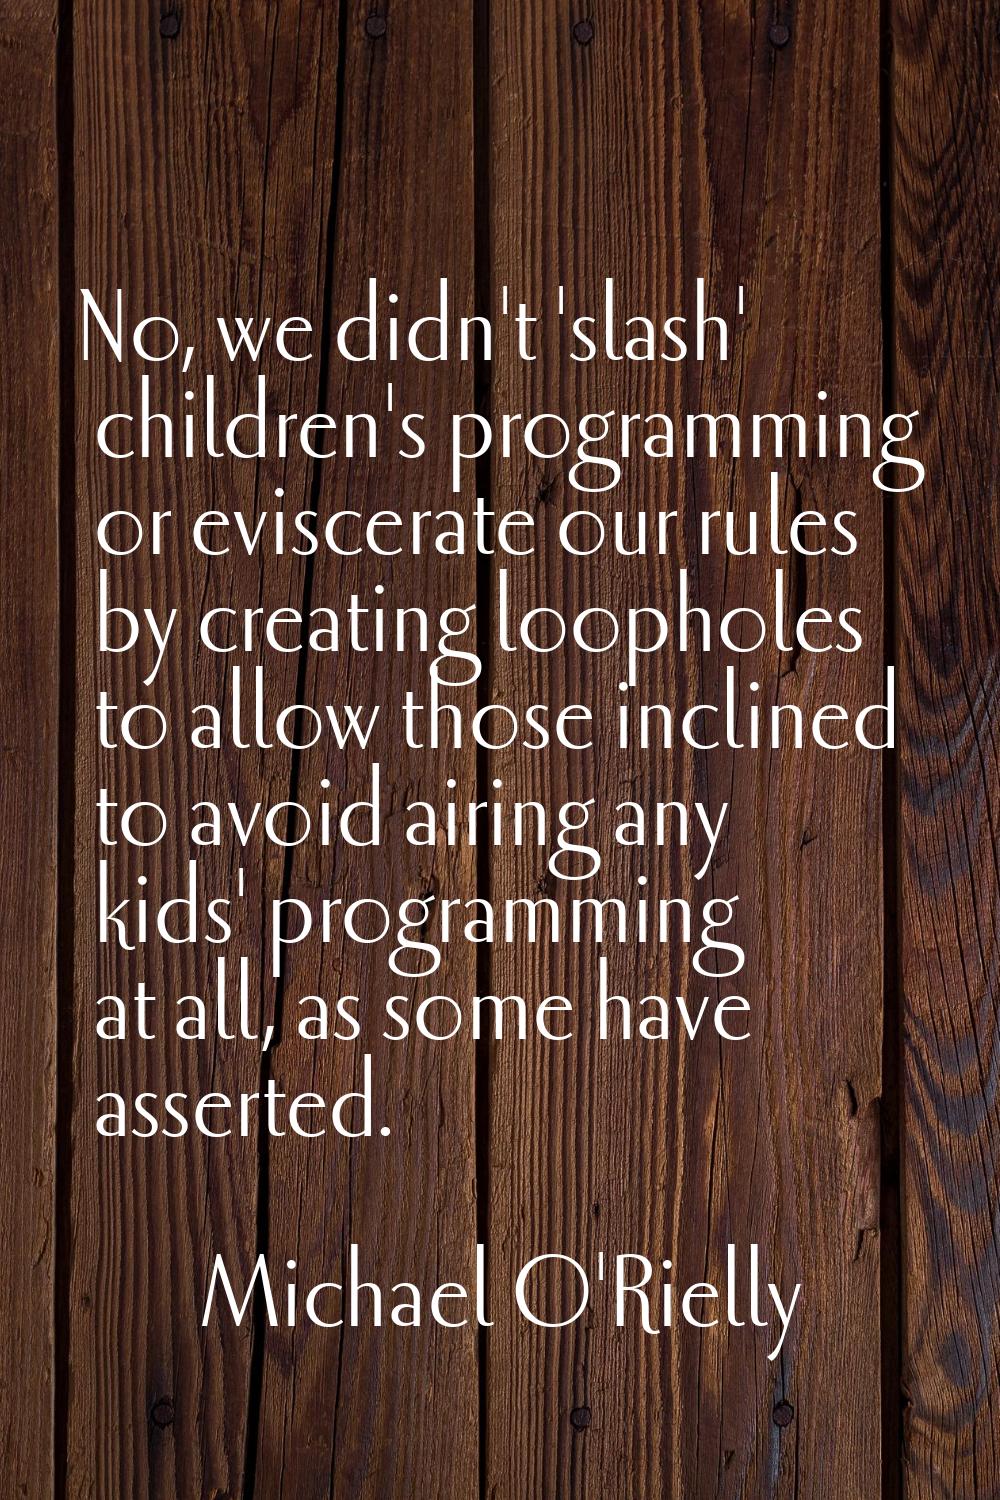 No, we didn't 'slash' children's programming or eviscerate our rules by creating loopholes to allow